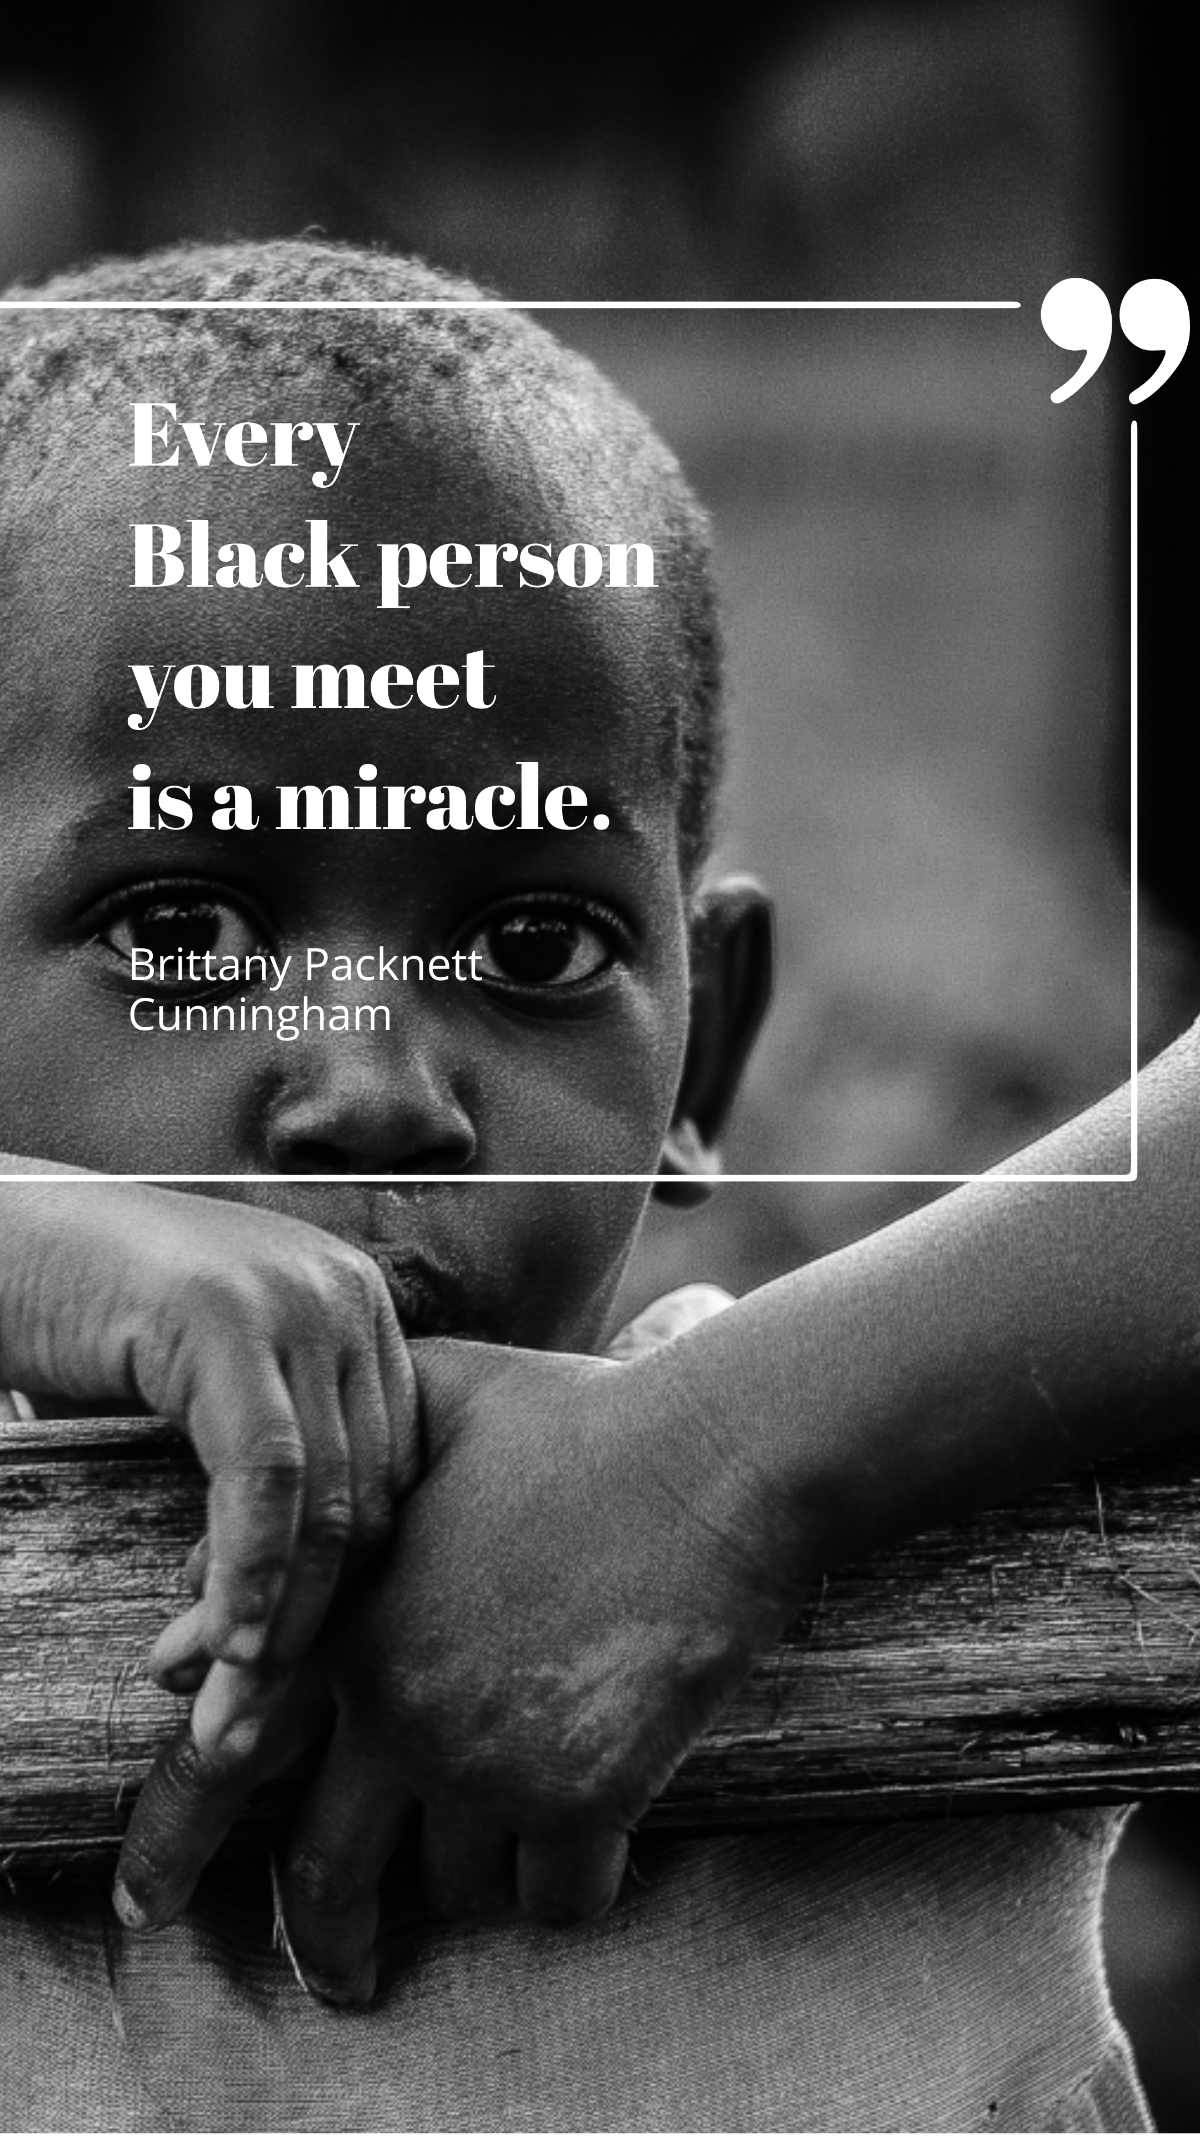 Brittany Packnett Cunningham - Every Black person you meet is a miracle. Template